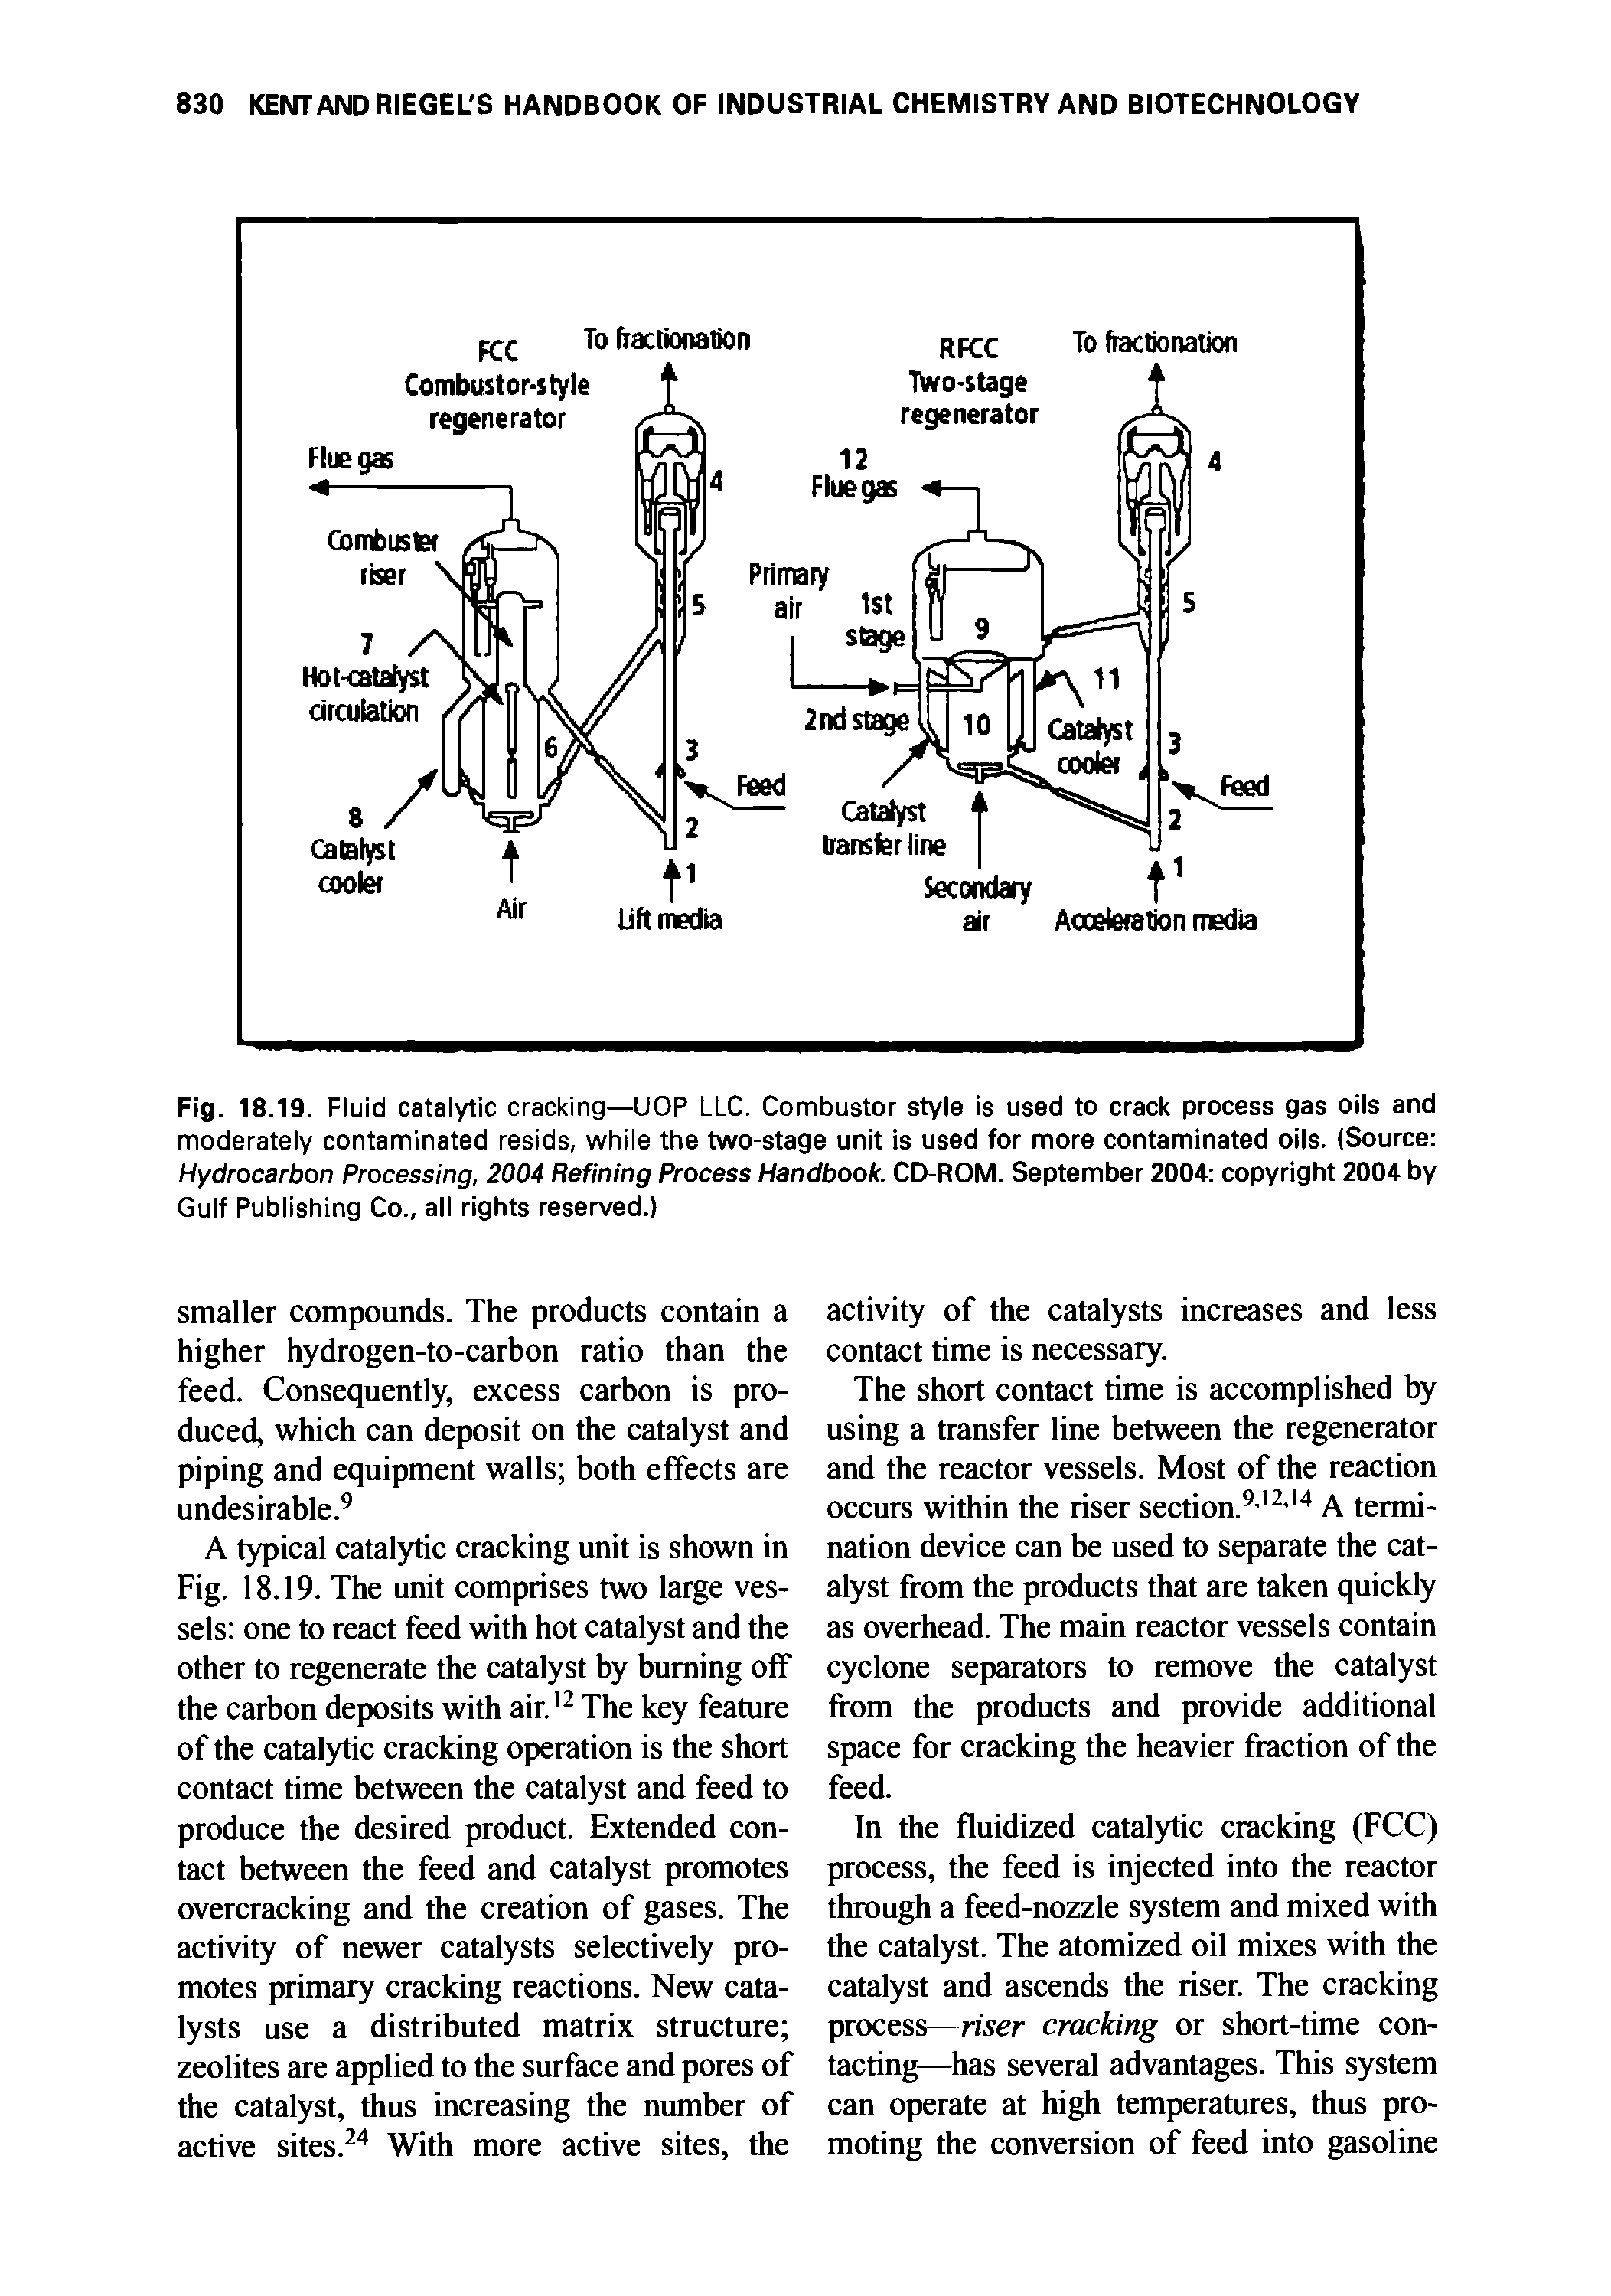 Fig. 18.19. Fluid catalytic cracking—UOP LLC. Combustor style is used to crack process gas oils and moderately contaminated resids, while the two-stage unit is used for more contaminated oils. (Source Hydrocarbon Processing, 2004 Refining Process Handbook. CD-ROM. September 2004 copyright 2004 by Gulf Publishing Co., all rights reserved.)...